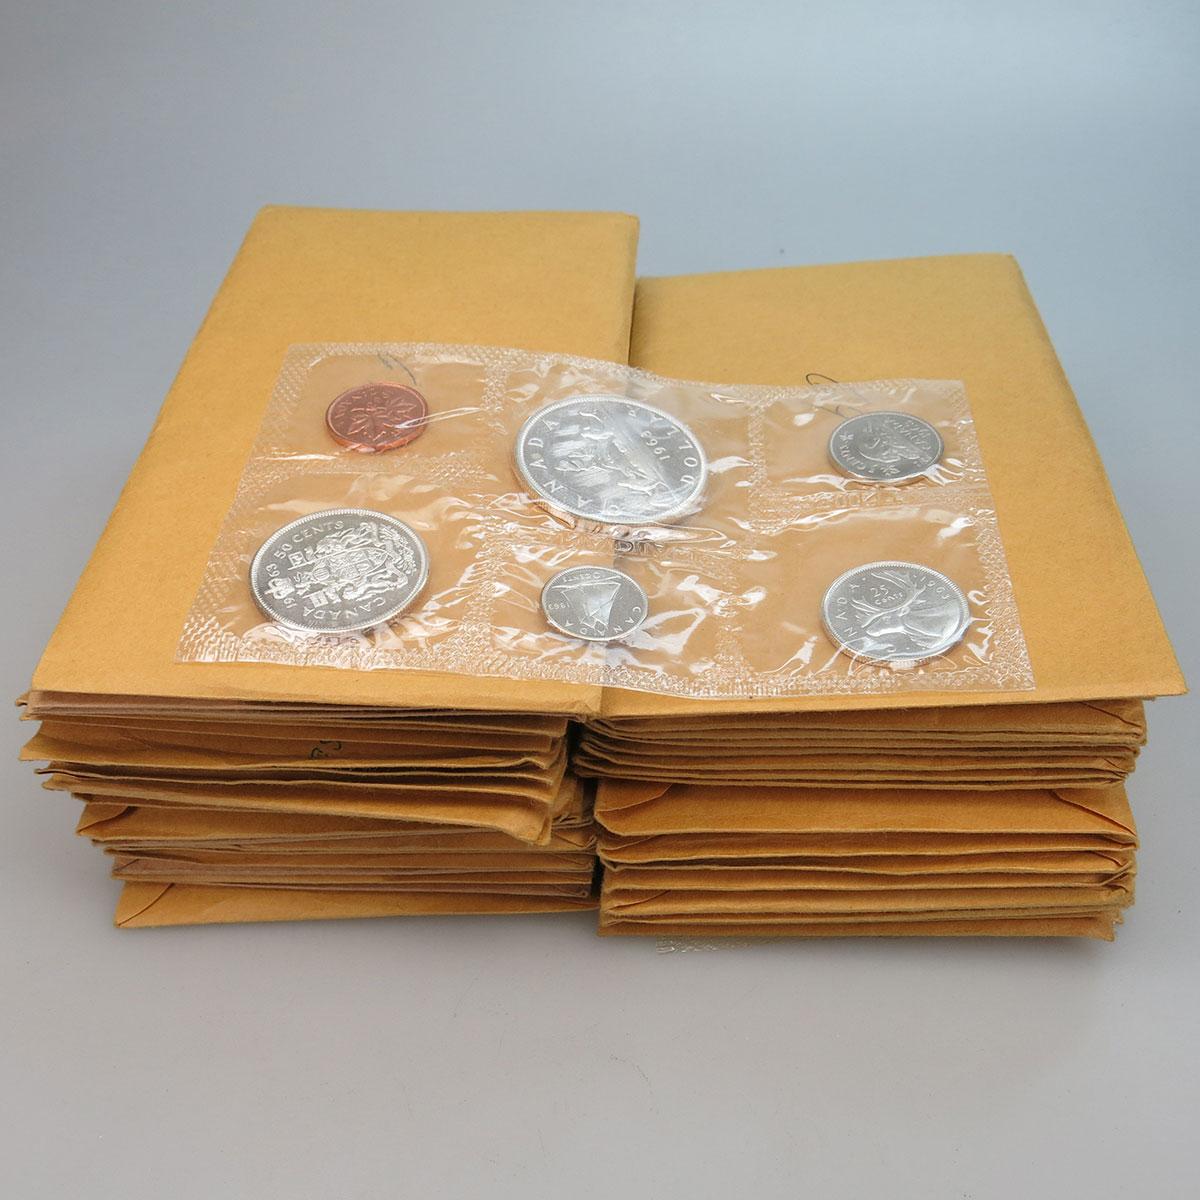 42 Canadian Uncirculated Coin Sets